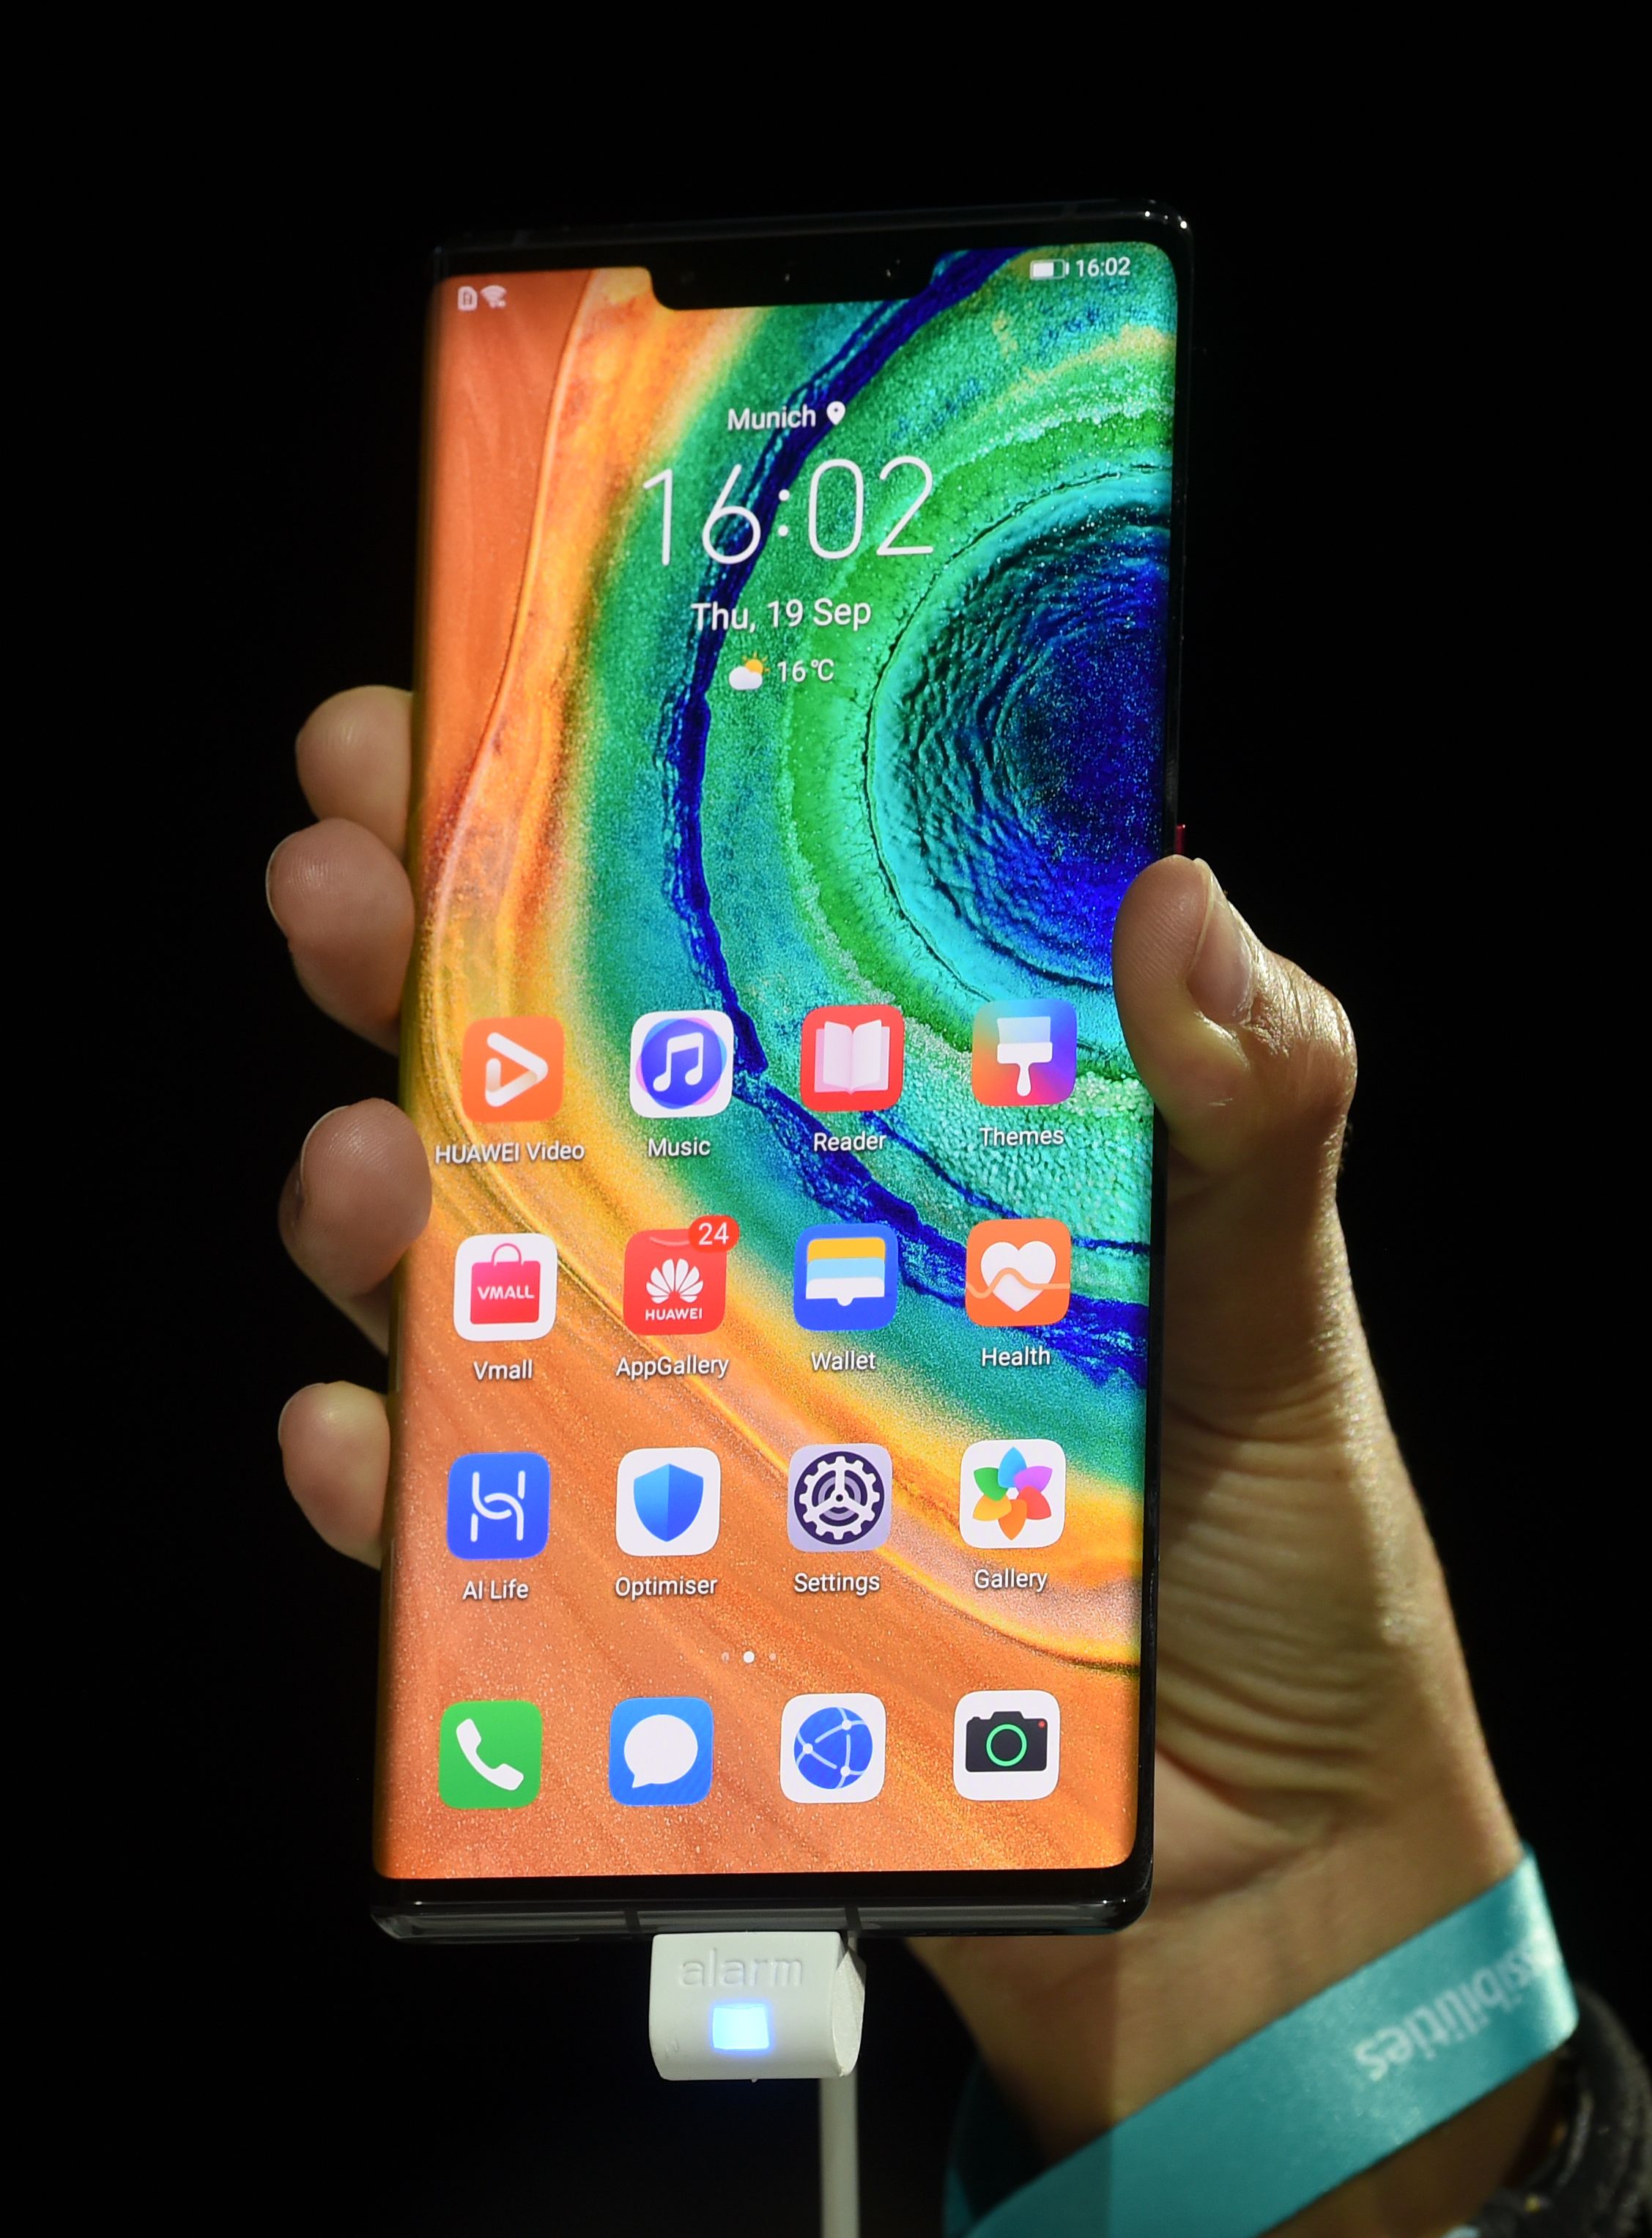 Huawei's "Mate 30 Pro", the latest smartphone by the Chinese tech giant Huawei, is displayed after a presentation to reveal Huawei's latest smartphones "Mate 30" and "Mate 30 Pro" in Munich, southern Germany, on September 19, 2019. - The latest high-end smartphone of Chinese giant Huawei could be the first that could be void of popular Google apps because of US sanctions. (Photo by Christof STACHE / AFP) (Photo credit should read CHRISTOF STACHE/AFP/Getty Images)